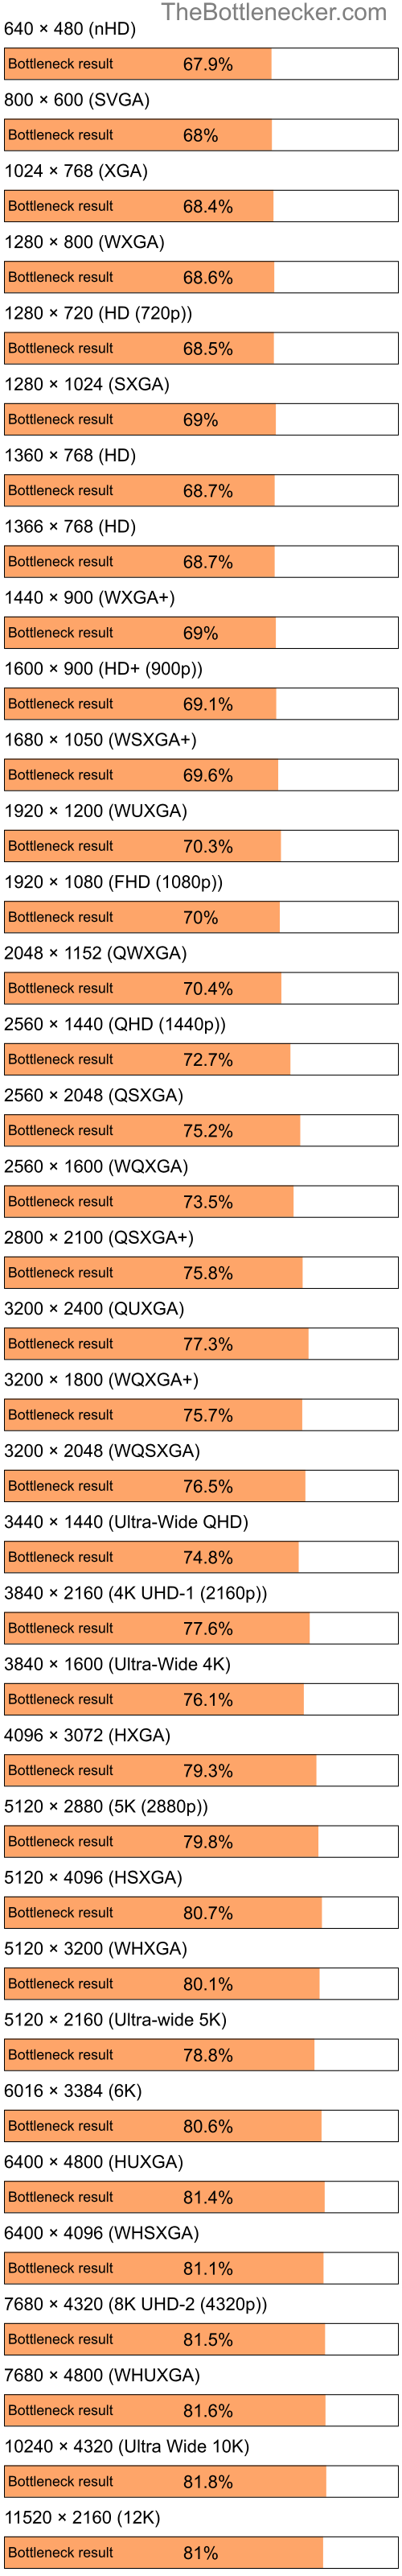 Bottleneck results by resolution for Intel Atom Z520 and AMD Radeon X1550 in General Tasks